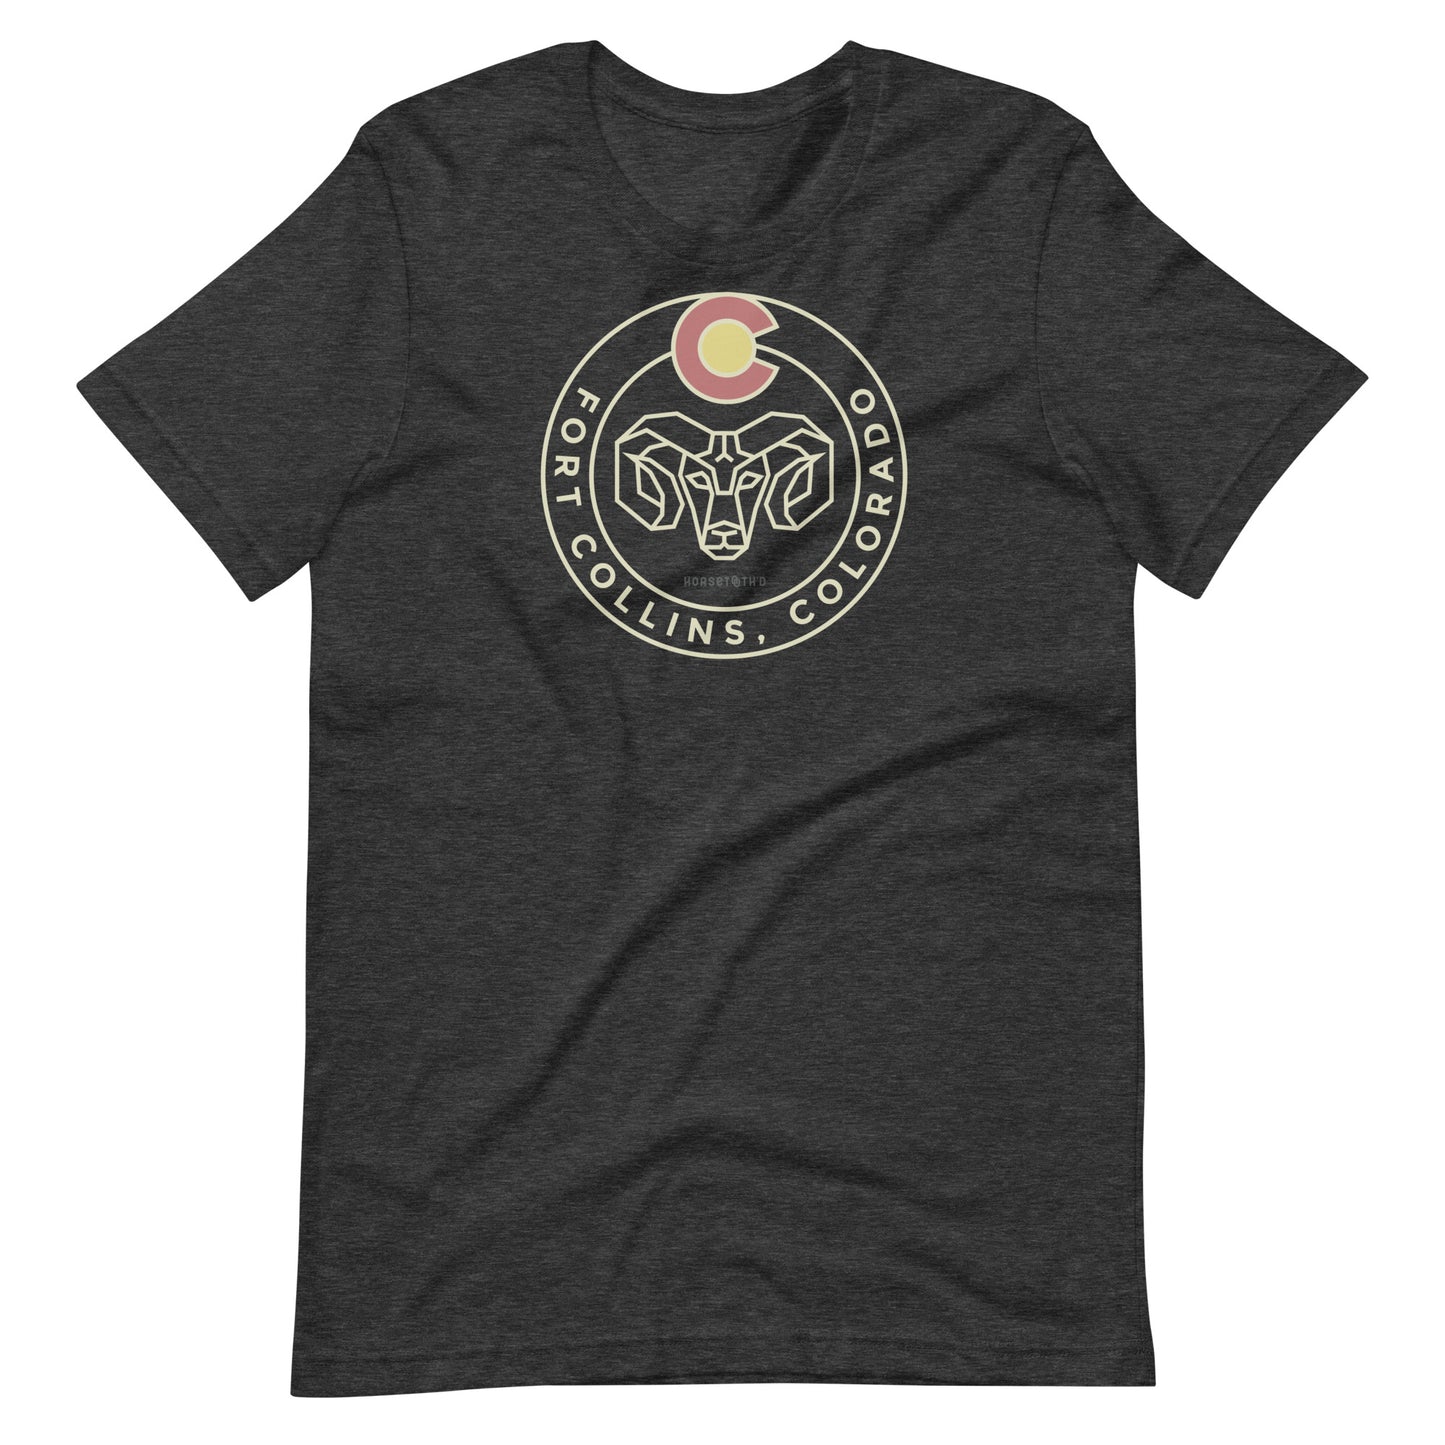 Bella Canvas 3001 t-shirt featuring CSU's Ram and Colorado's 'C' logo, representing state and academic pride